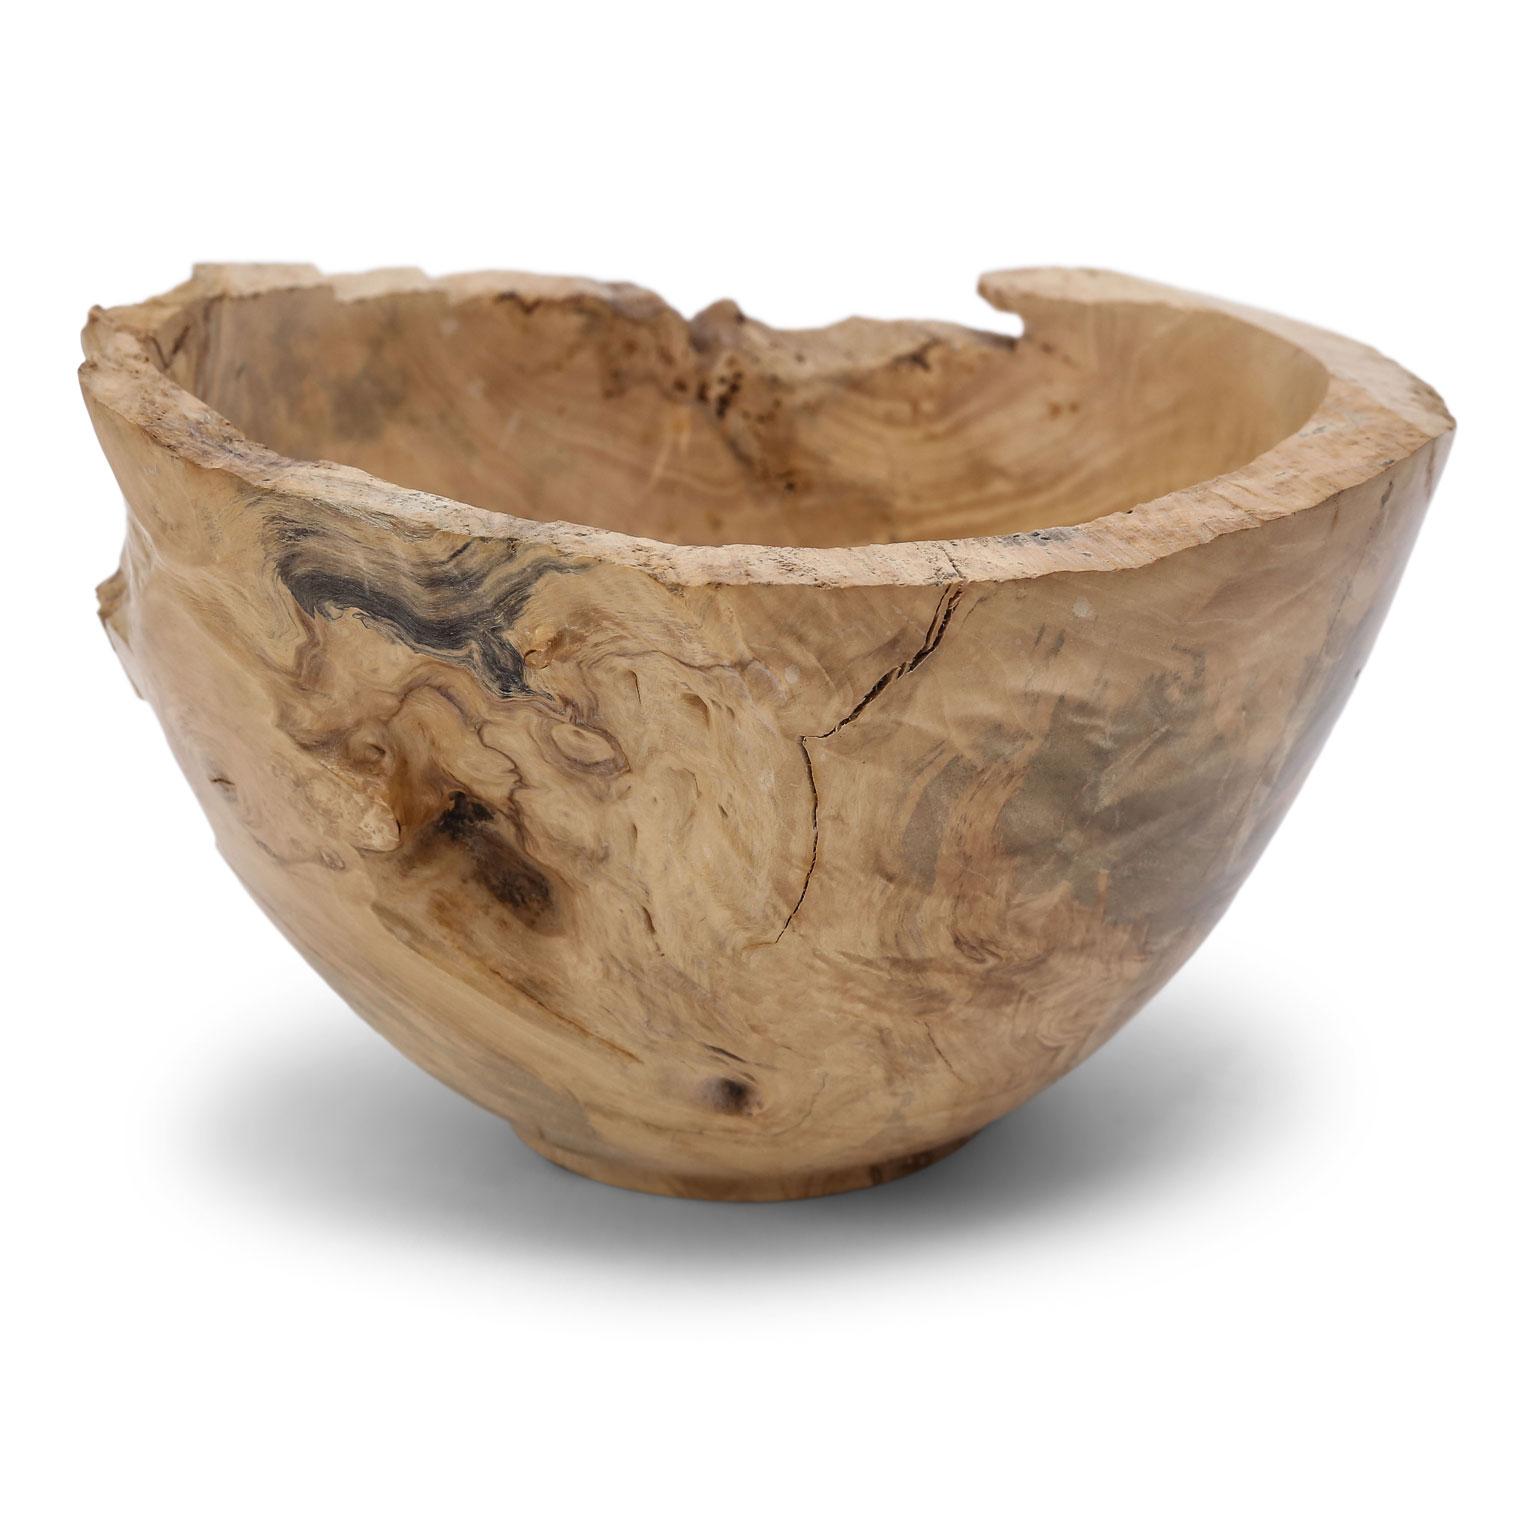 Vintage turned wood bowl in an organic modern style with a natural-edged rim.